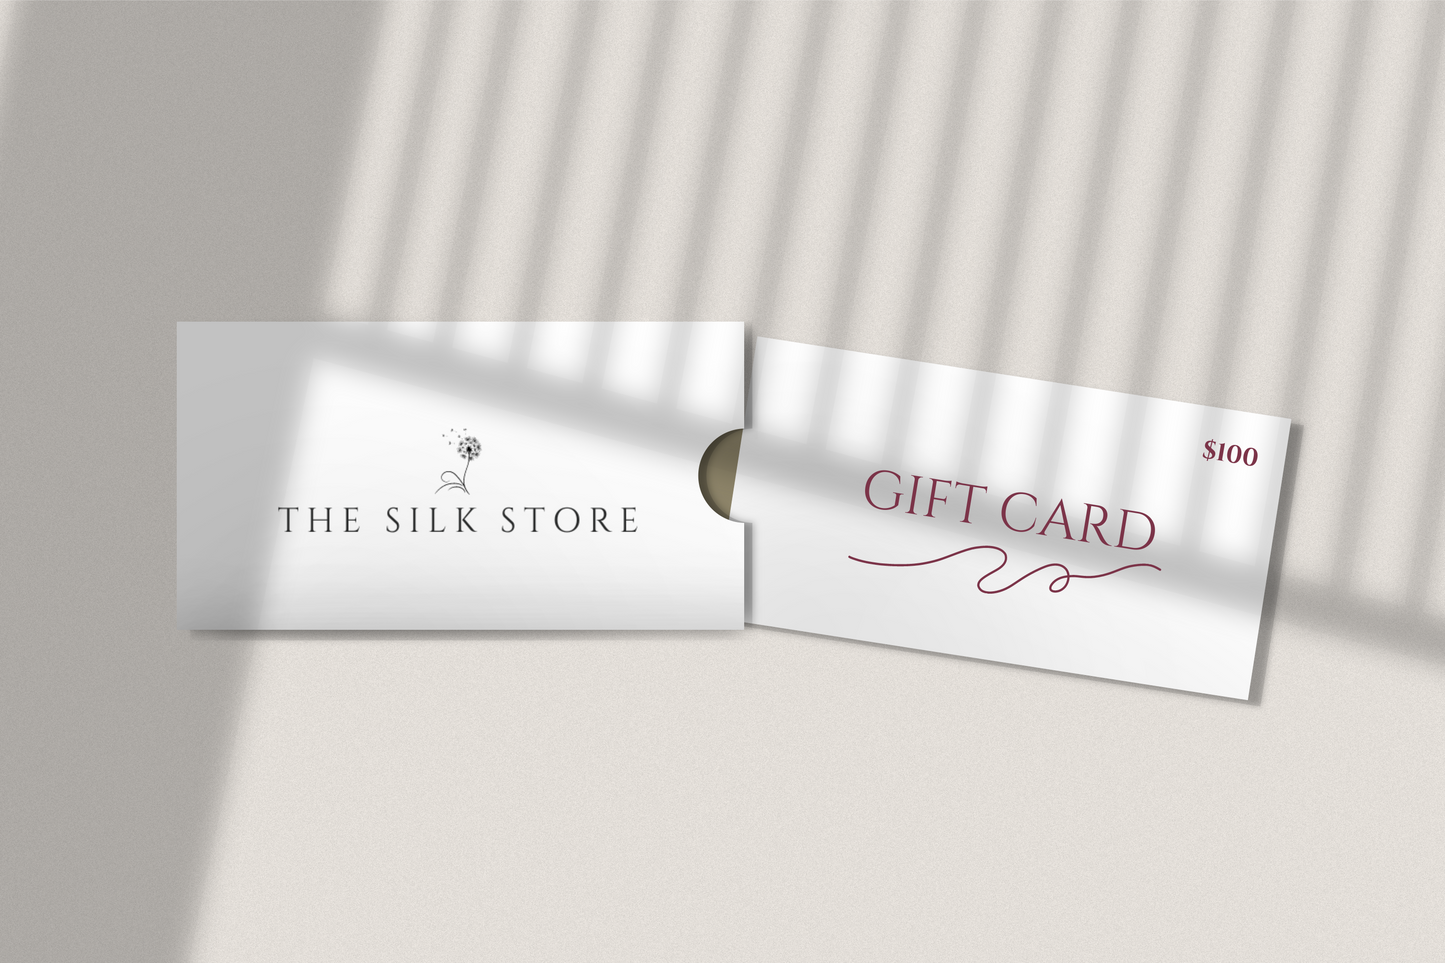 The Silk Store Gift Card